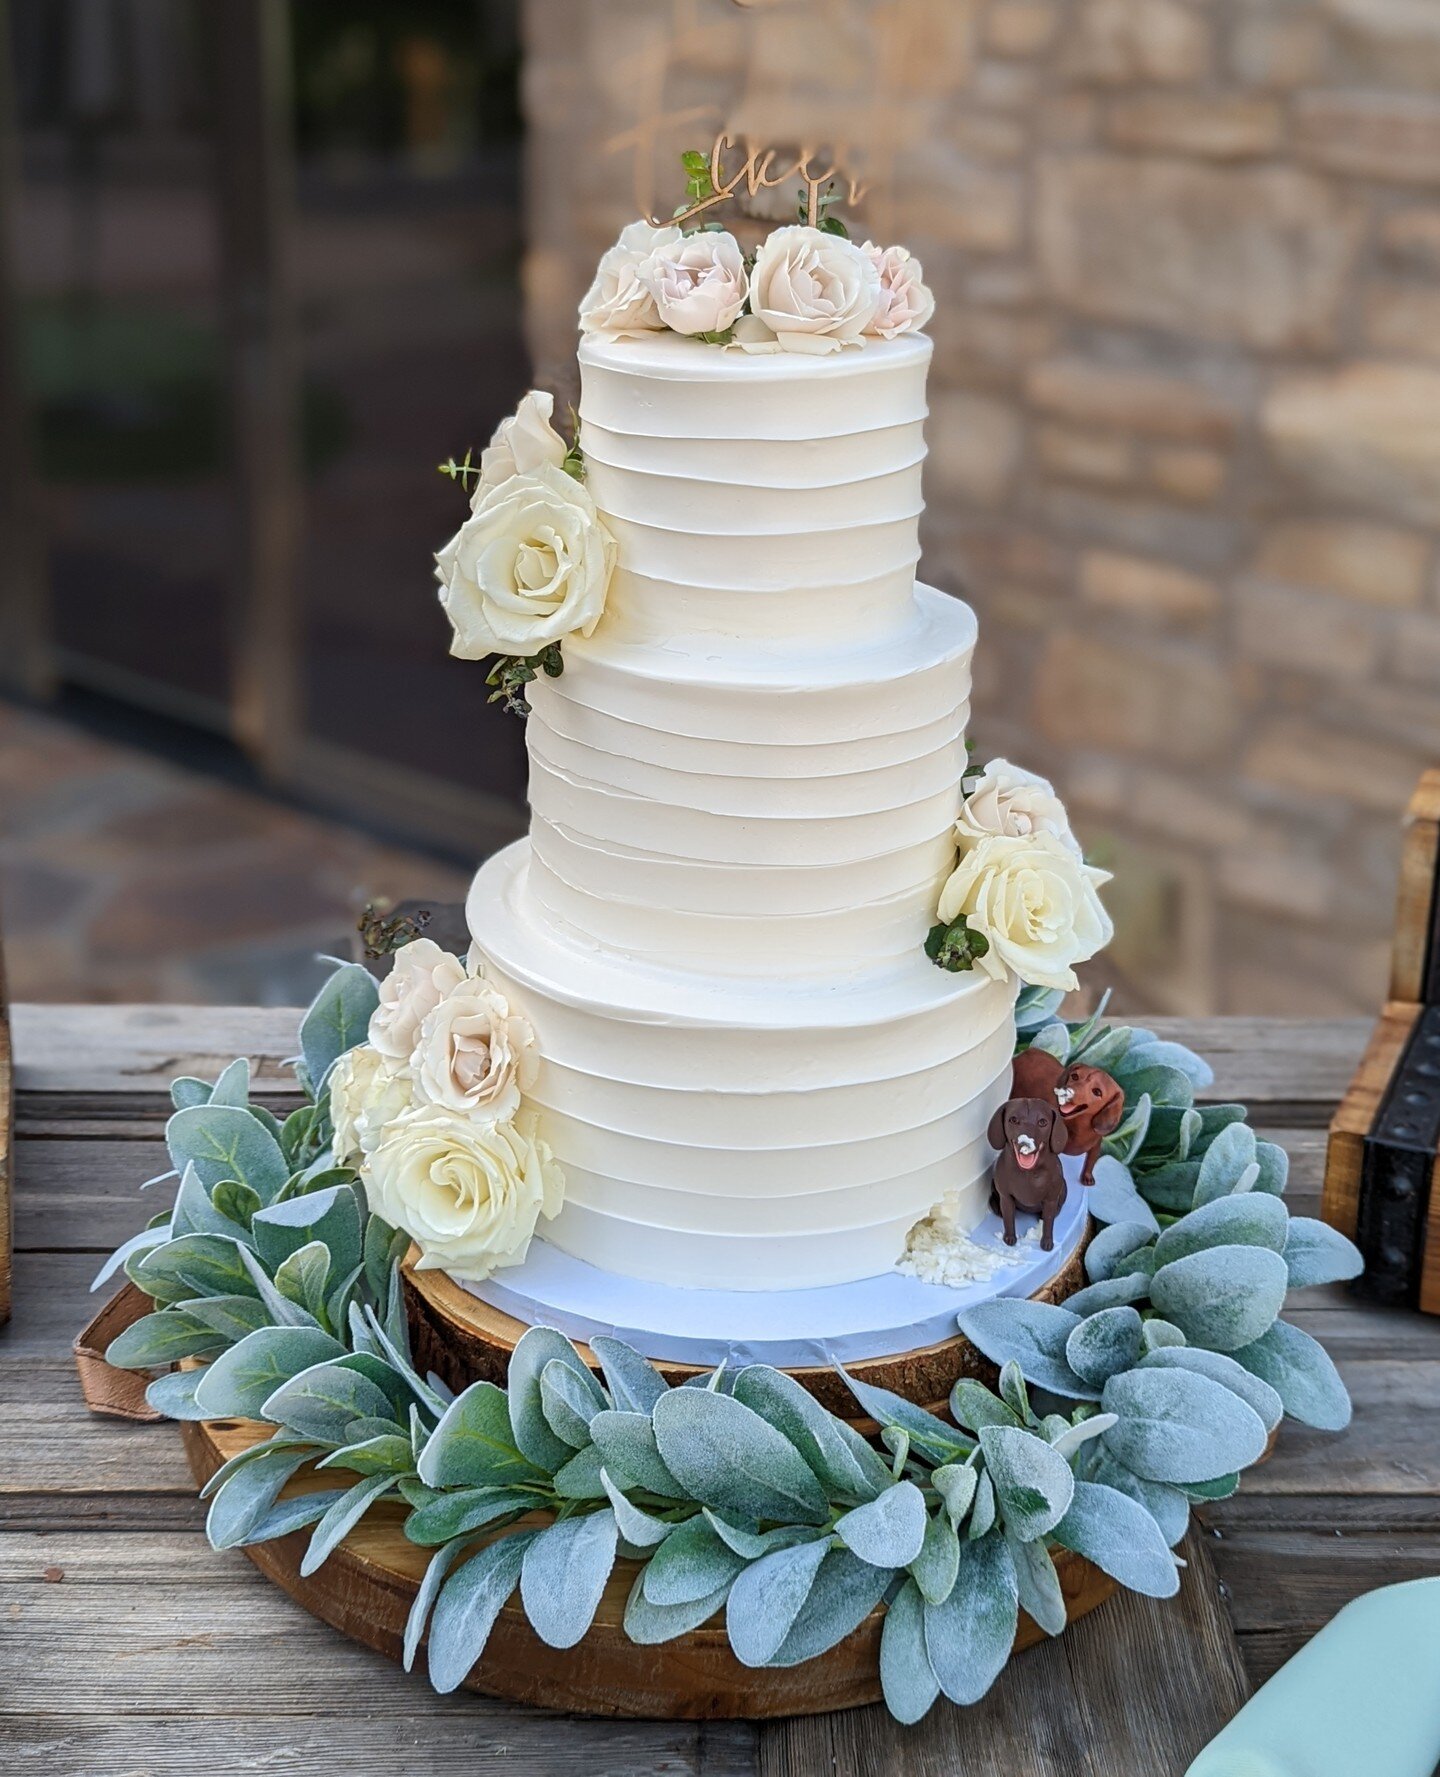 Horizontal rustic cake⁠
⁠
⁠
Have an upcoming wedding? Call us at⁠
(951) 699-2399 for a wedding consultation⁠
or visit our website at www.1914bakery.com for more info!⁠
⁠
#dessert #cakedesigner #flowers #temeculawine #chocolate #food #customcake #anni